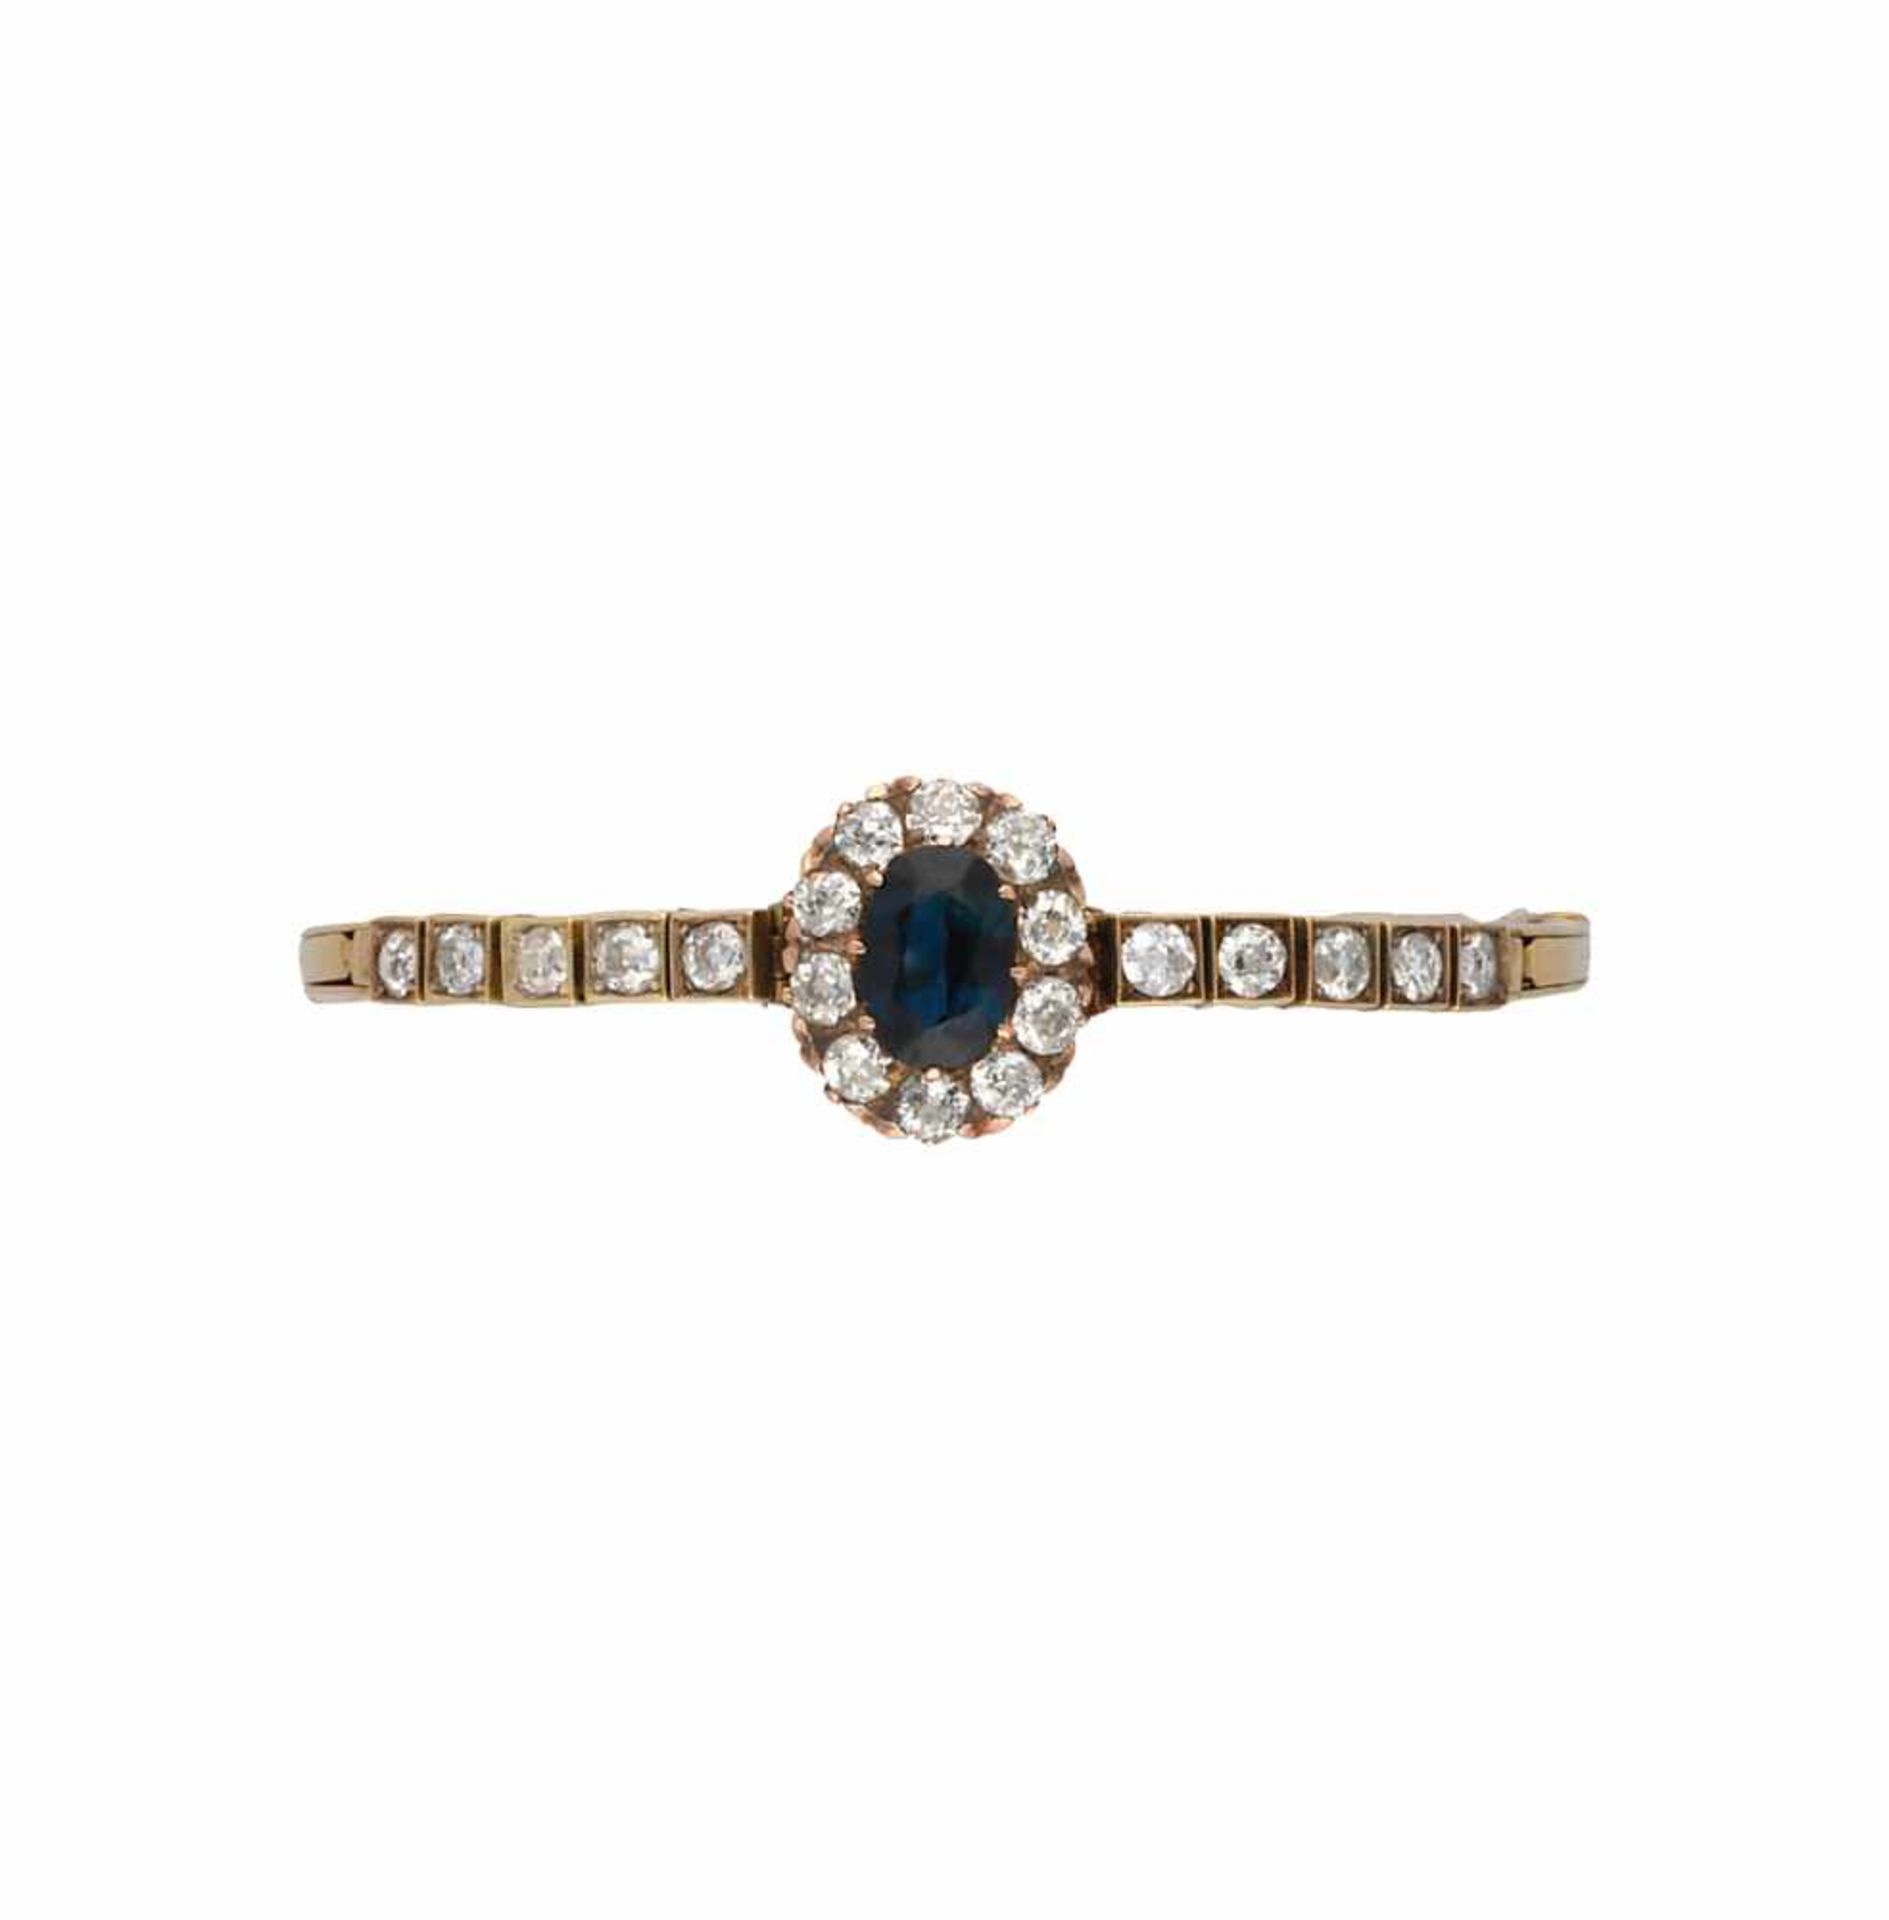 Sapphire bracelet with diamonds border, circa 1950.Gold, oval cut sapphire, 1.48 cts and old